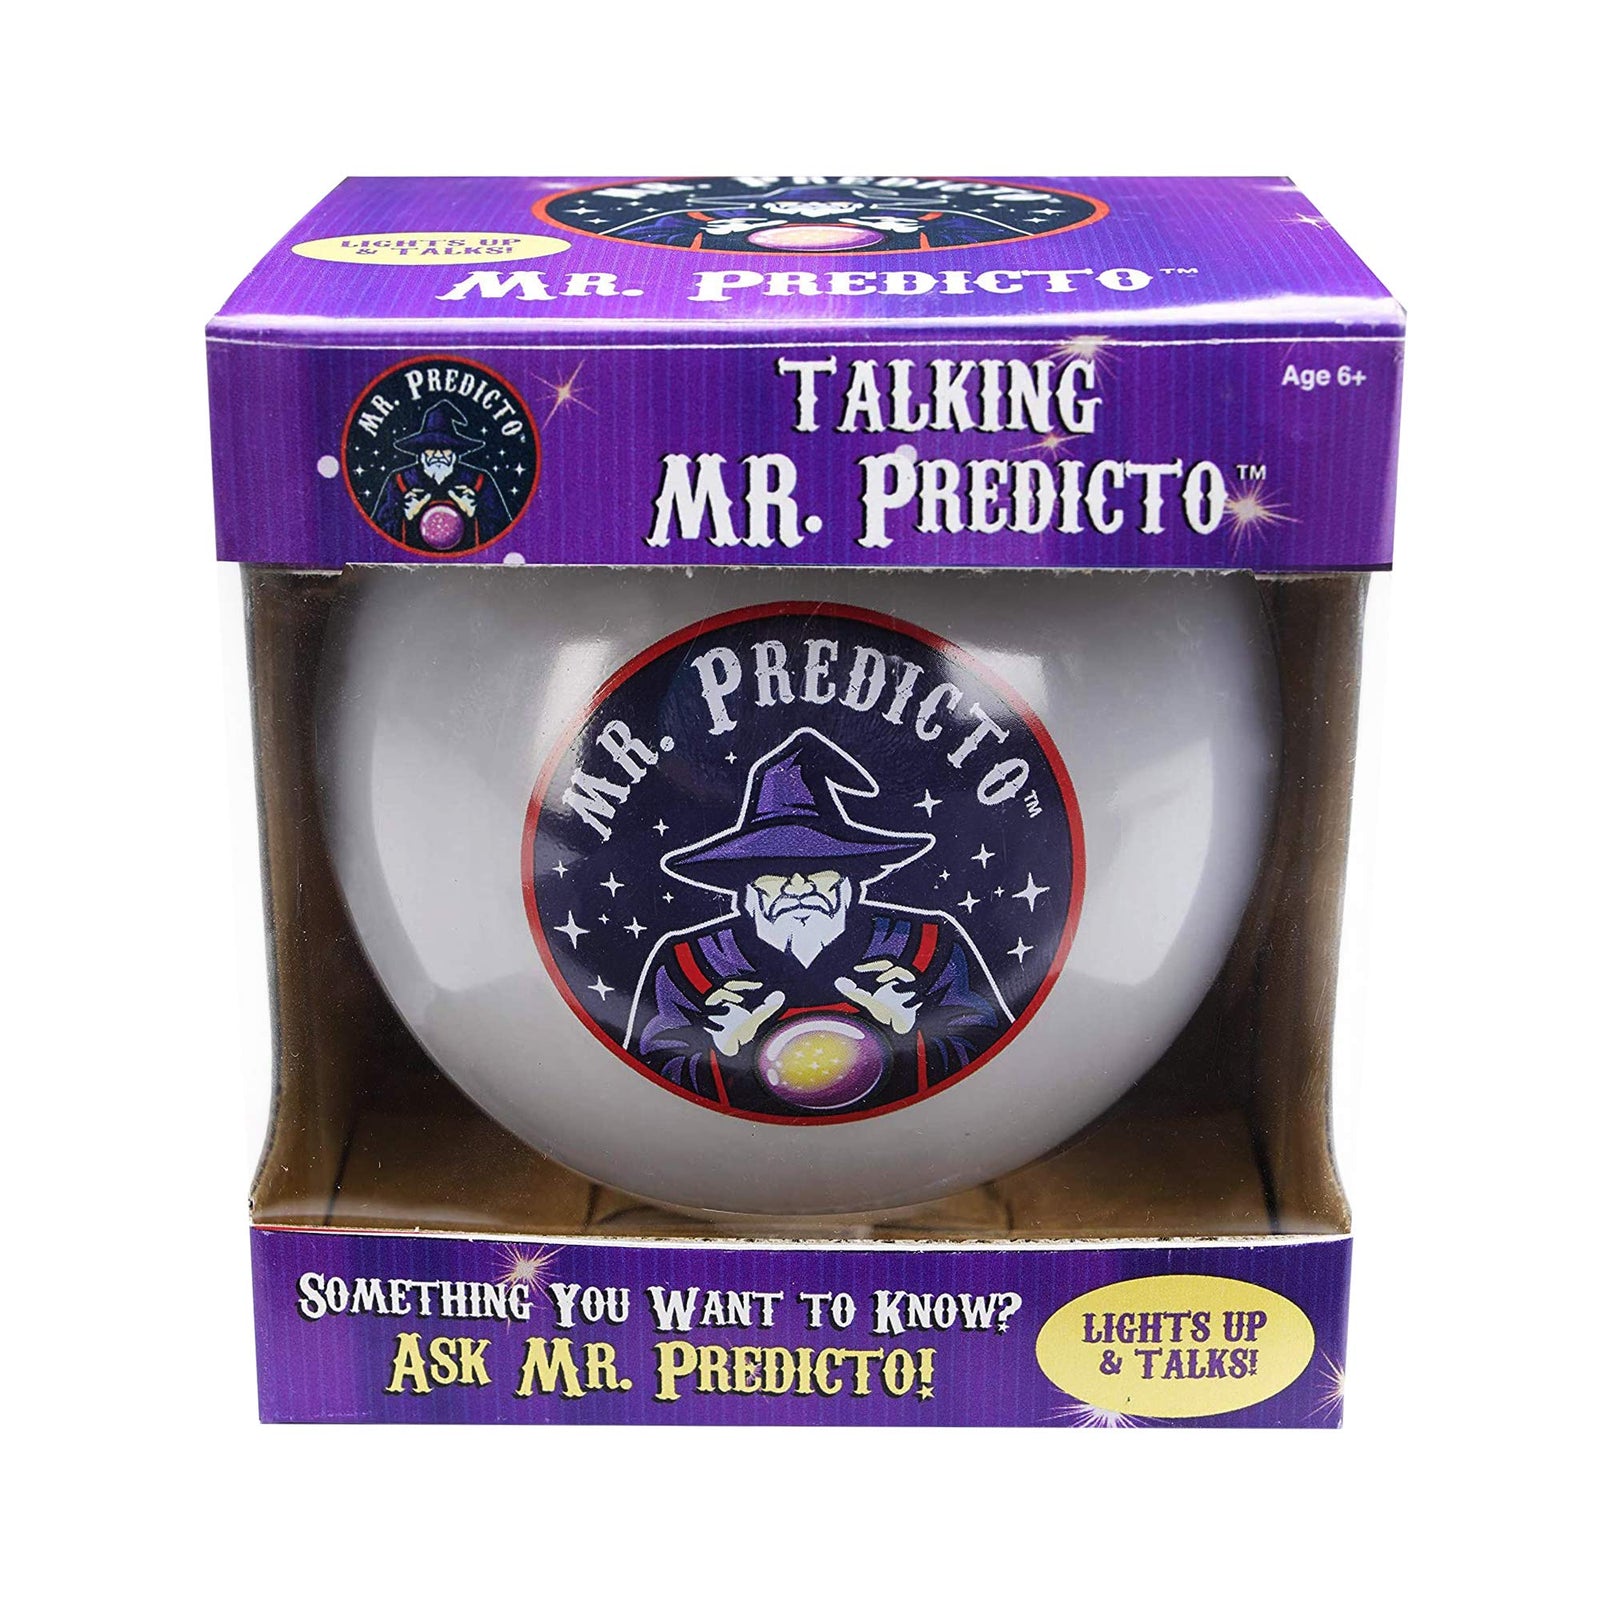 Mr. Predicto Plastic Fortune Telling Ball - Christmas Stocking Stuffer for Kids - Talking Crystal Ball Toy Like Magic 8 Ball - Ask a YES or NO Question & He'll Magically Light Up & Speak the Answer